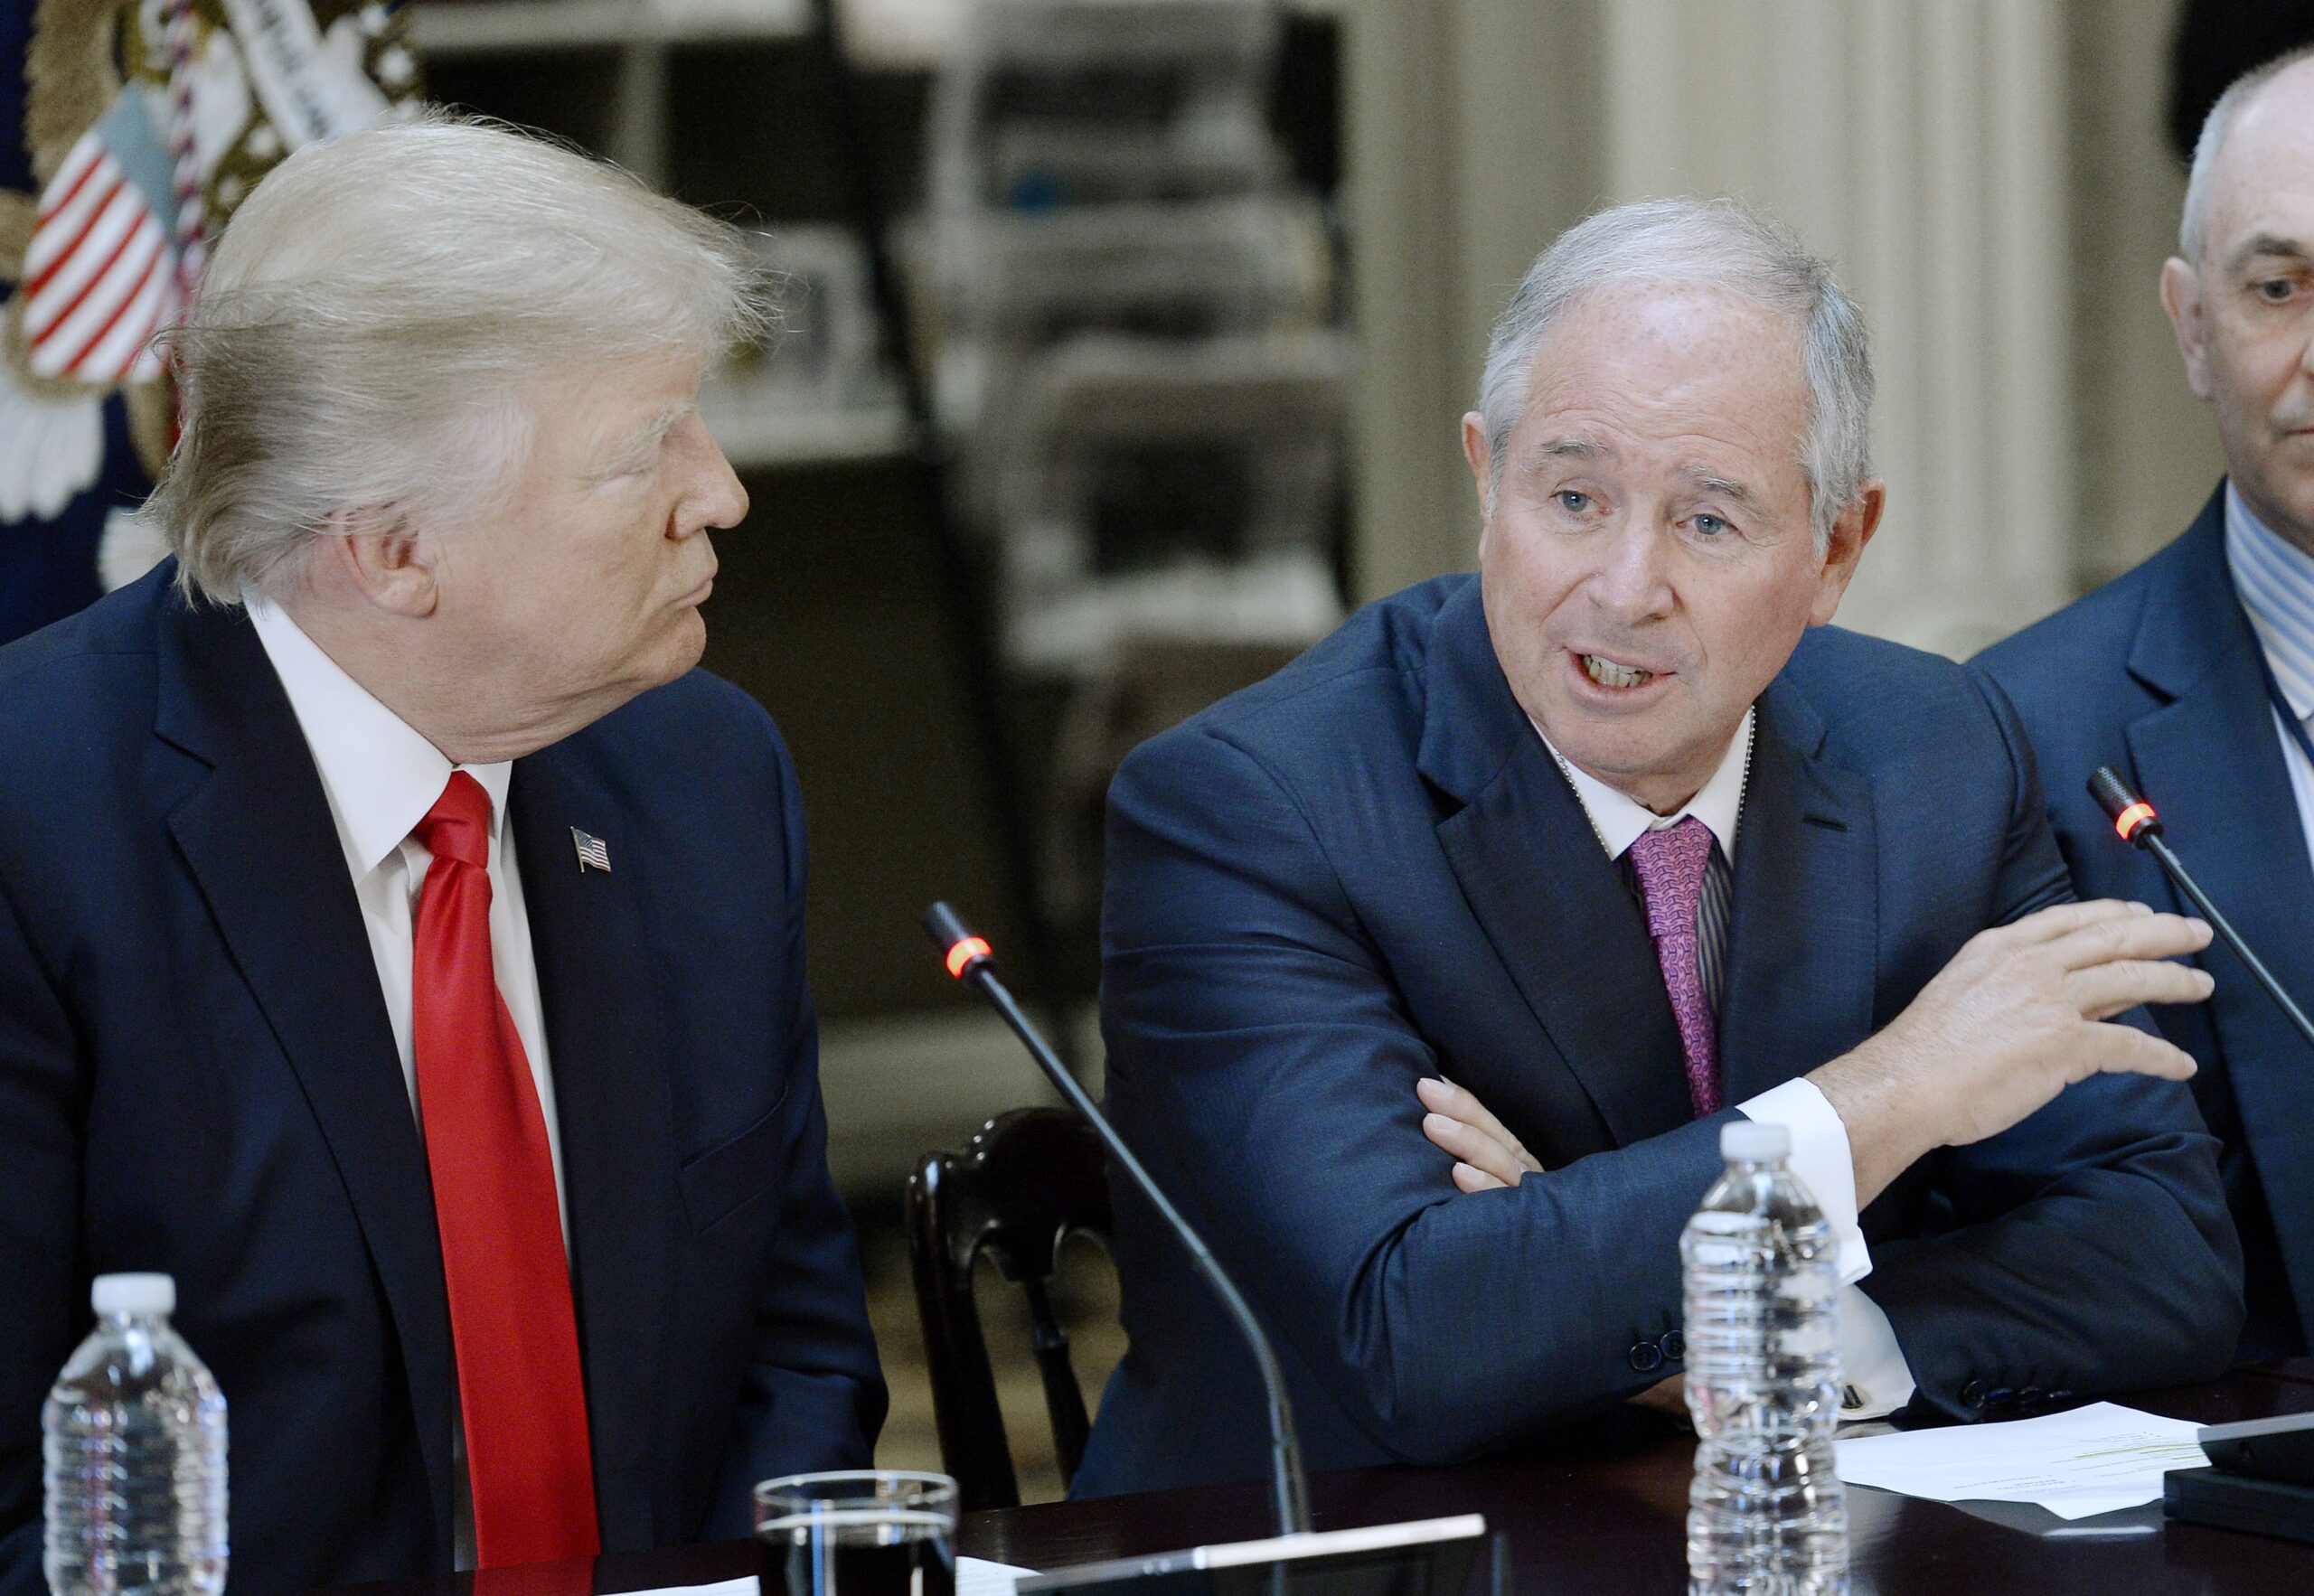 Blackstone CEO Pledges Support to Trump: “Voting for Change